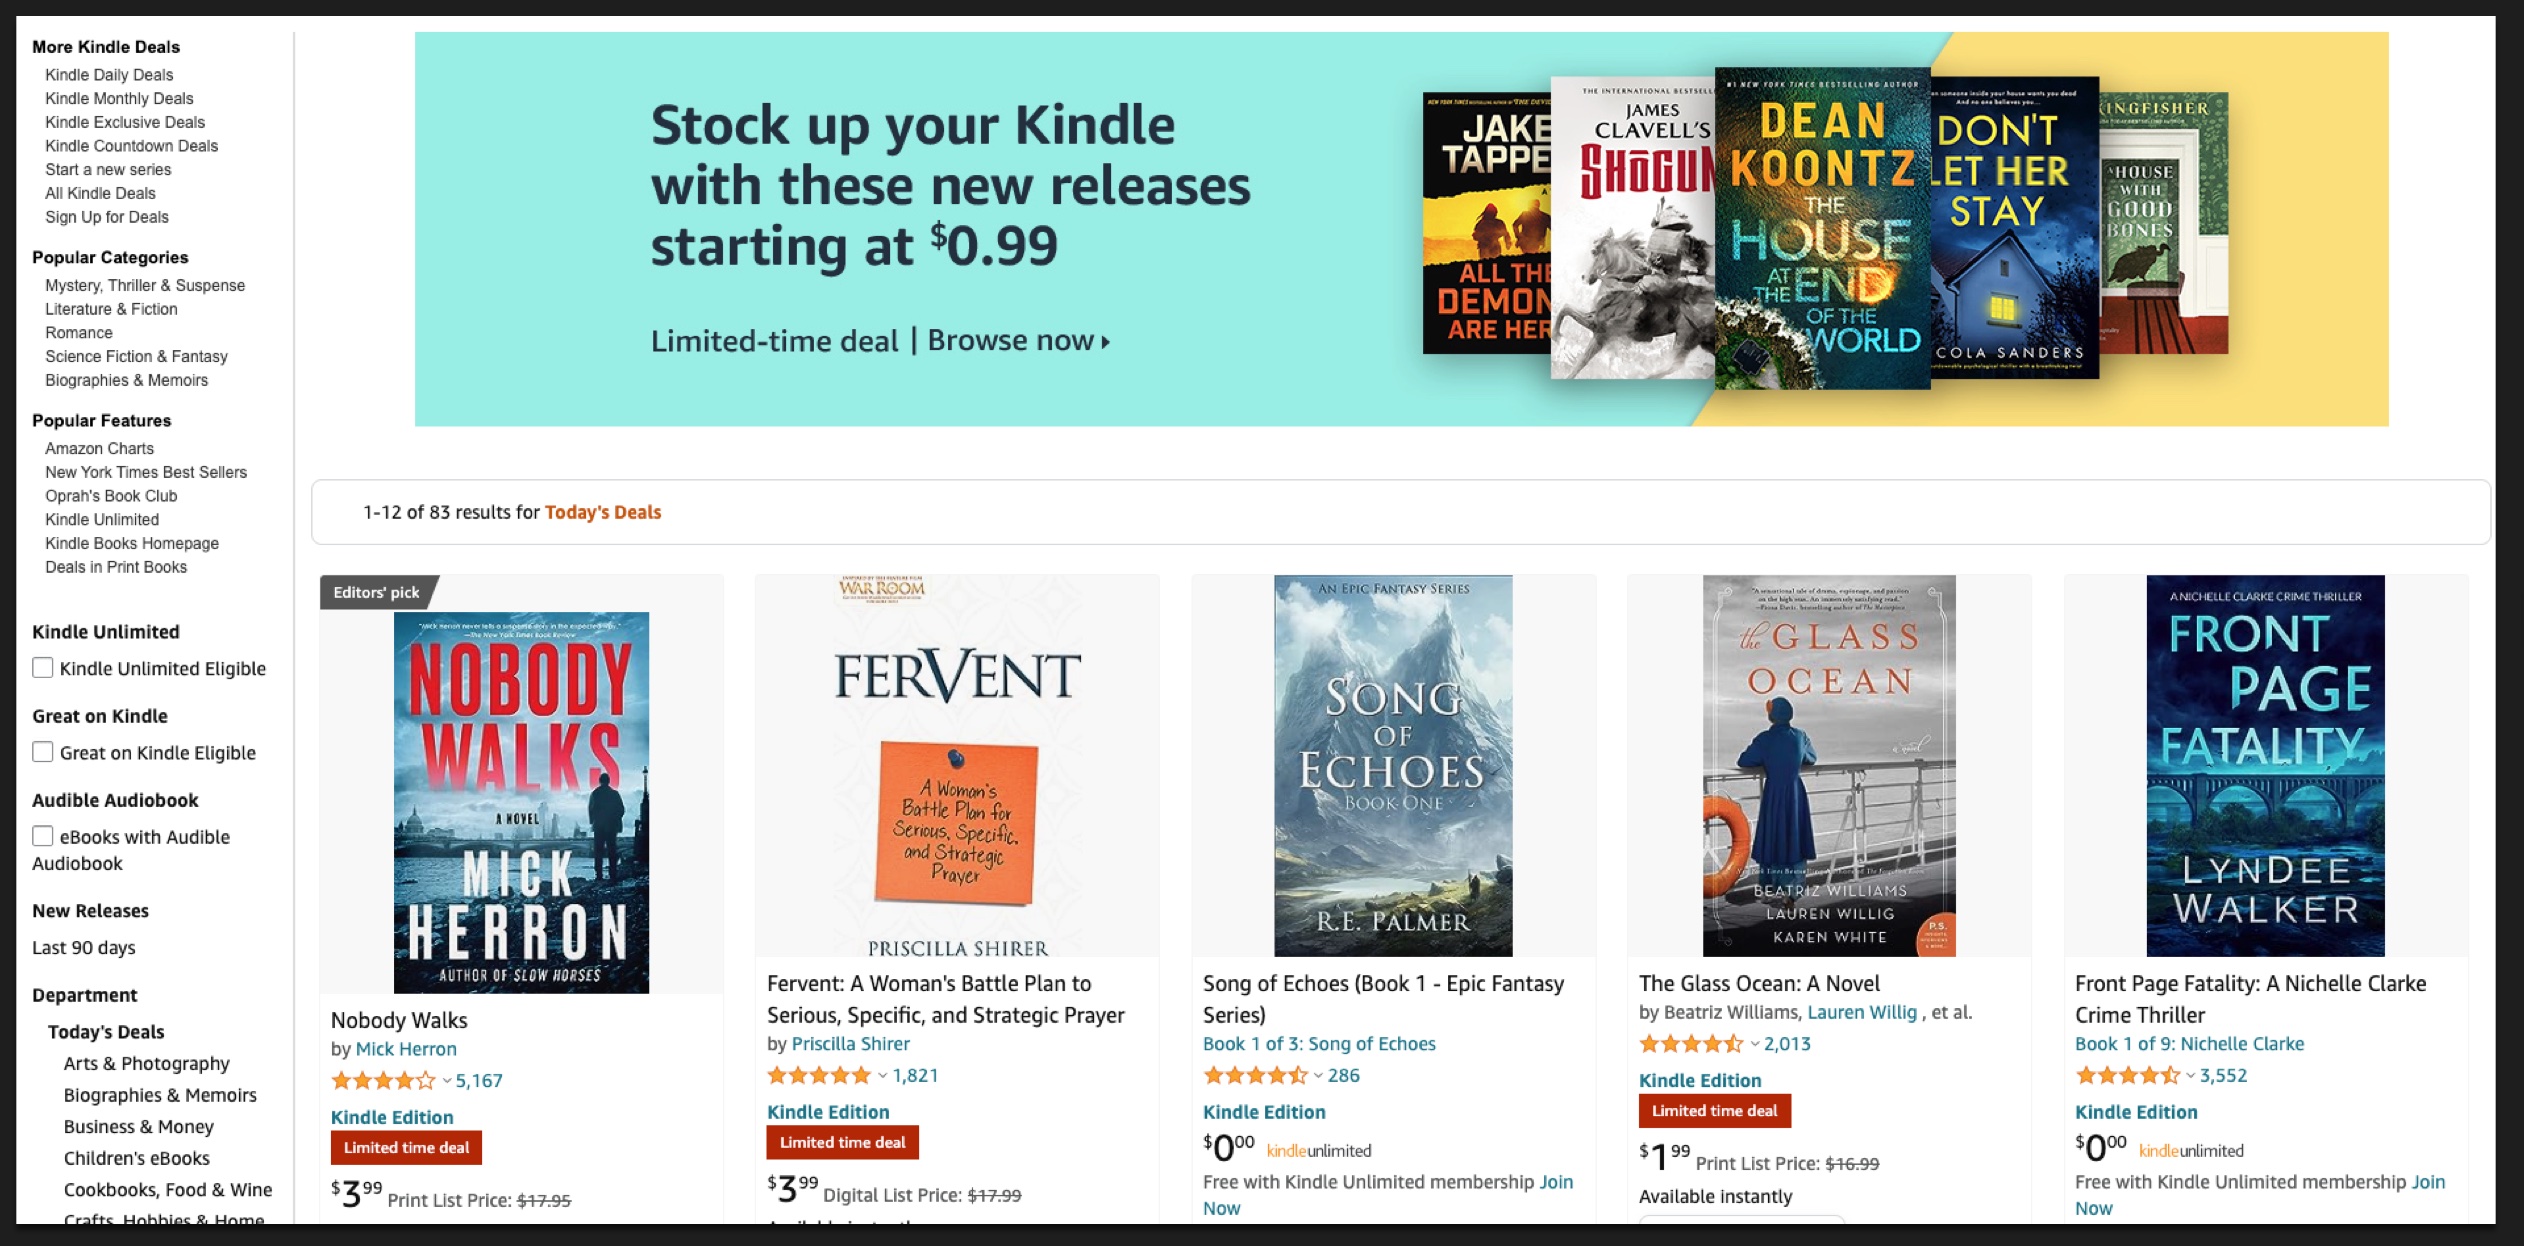 How to Find Kindle Daily Deals for Romance Books - Step 6